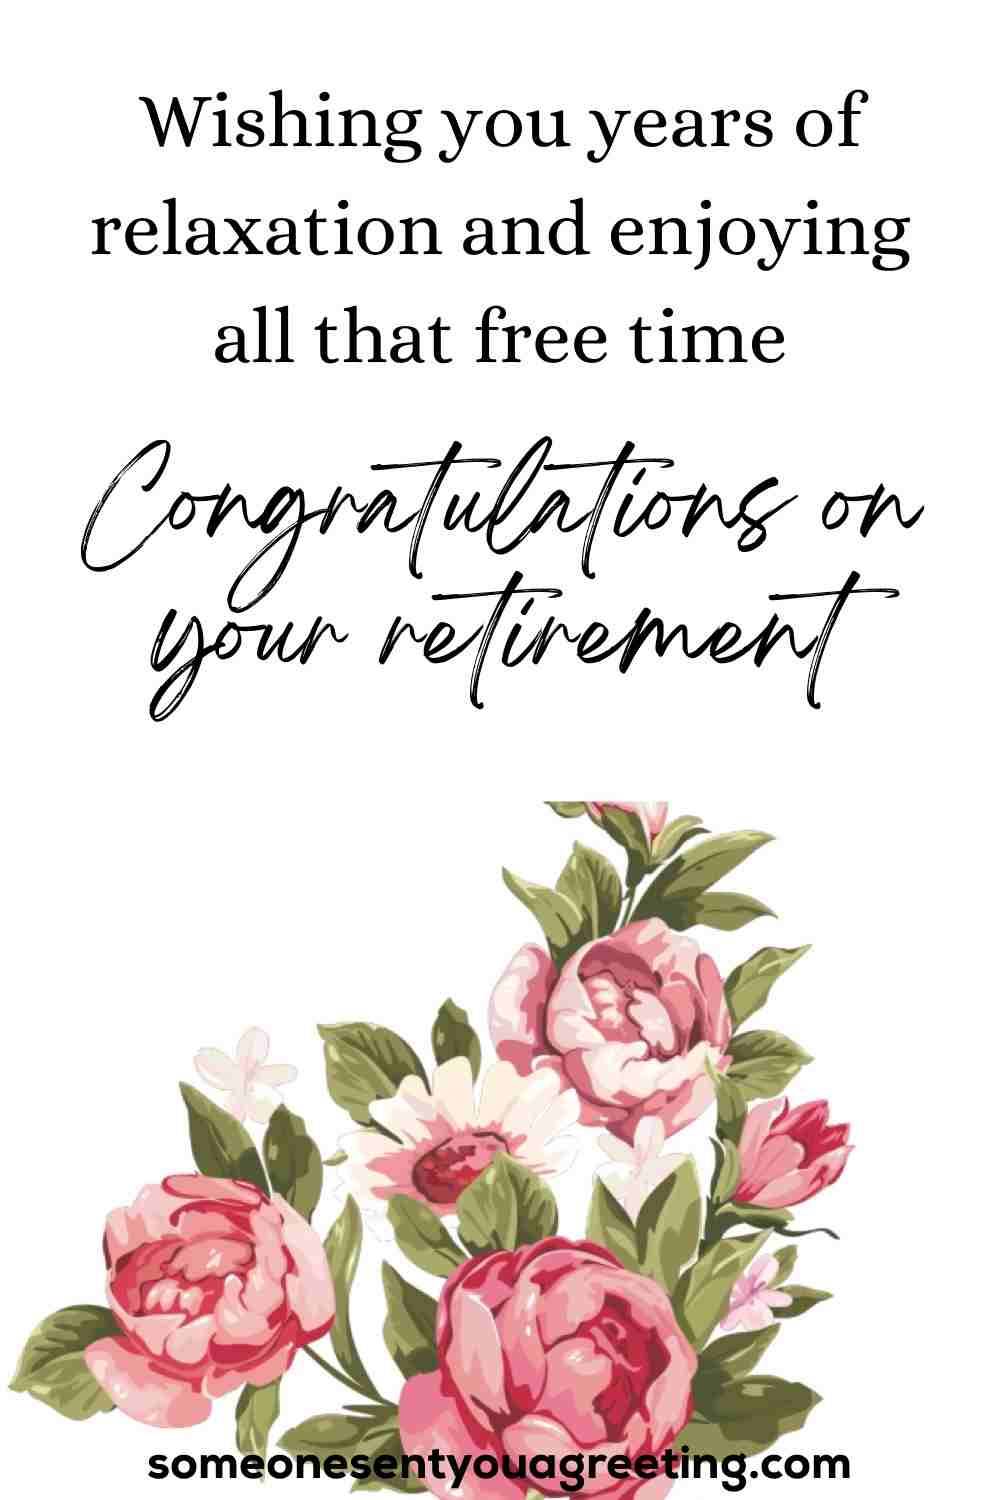 congratulations on your retirement wishes